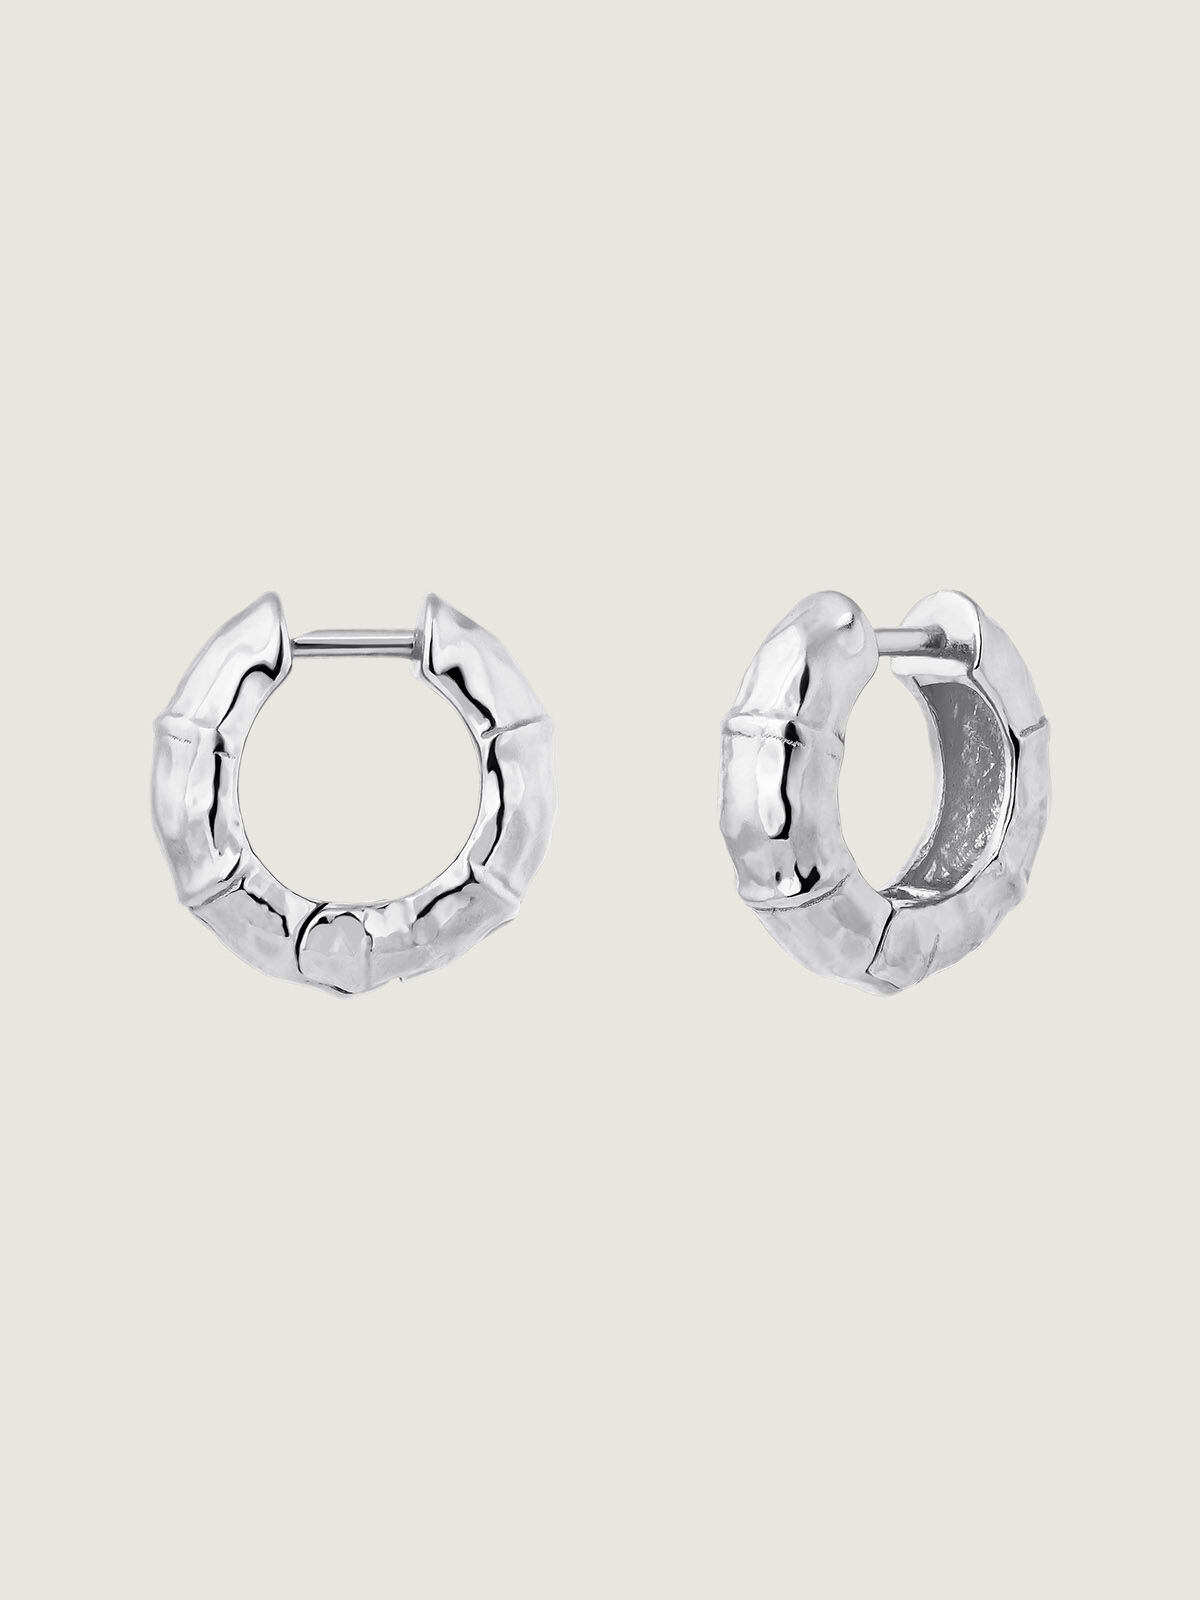 Small 925 silver hoop earrings with bamboo texture. | Aristocrazy